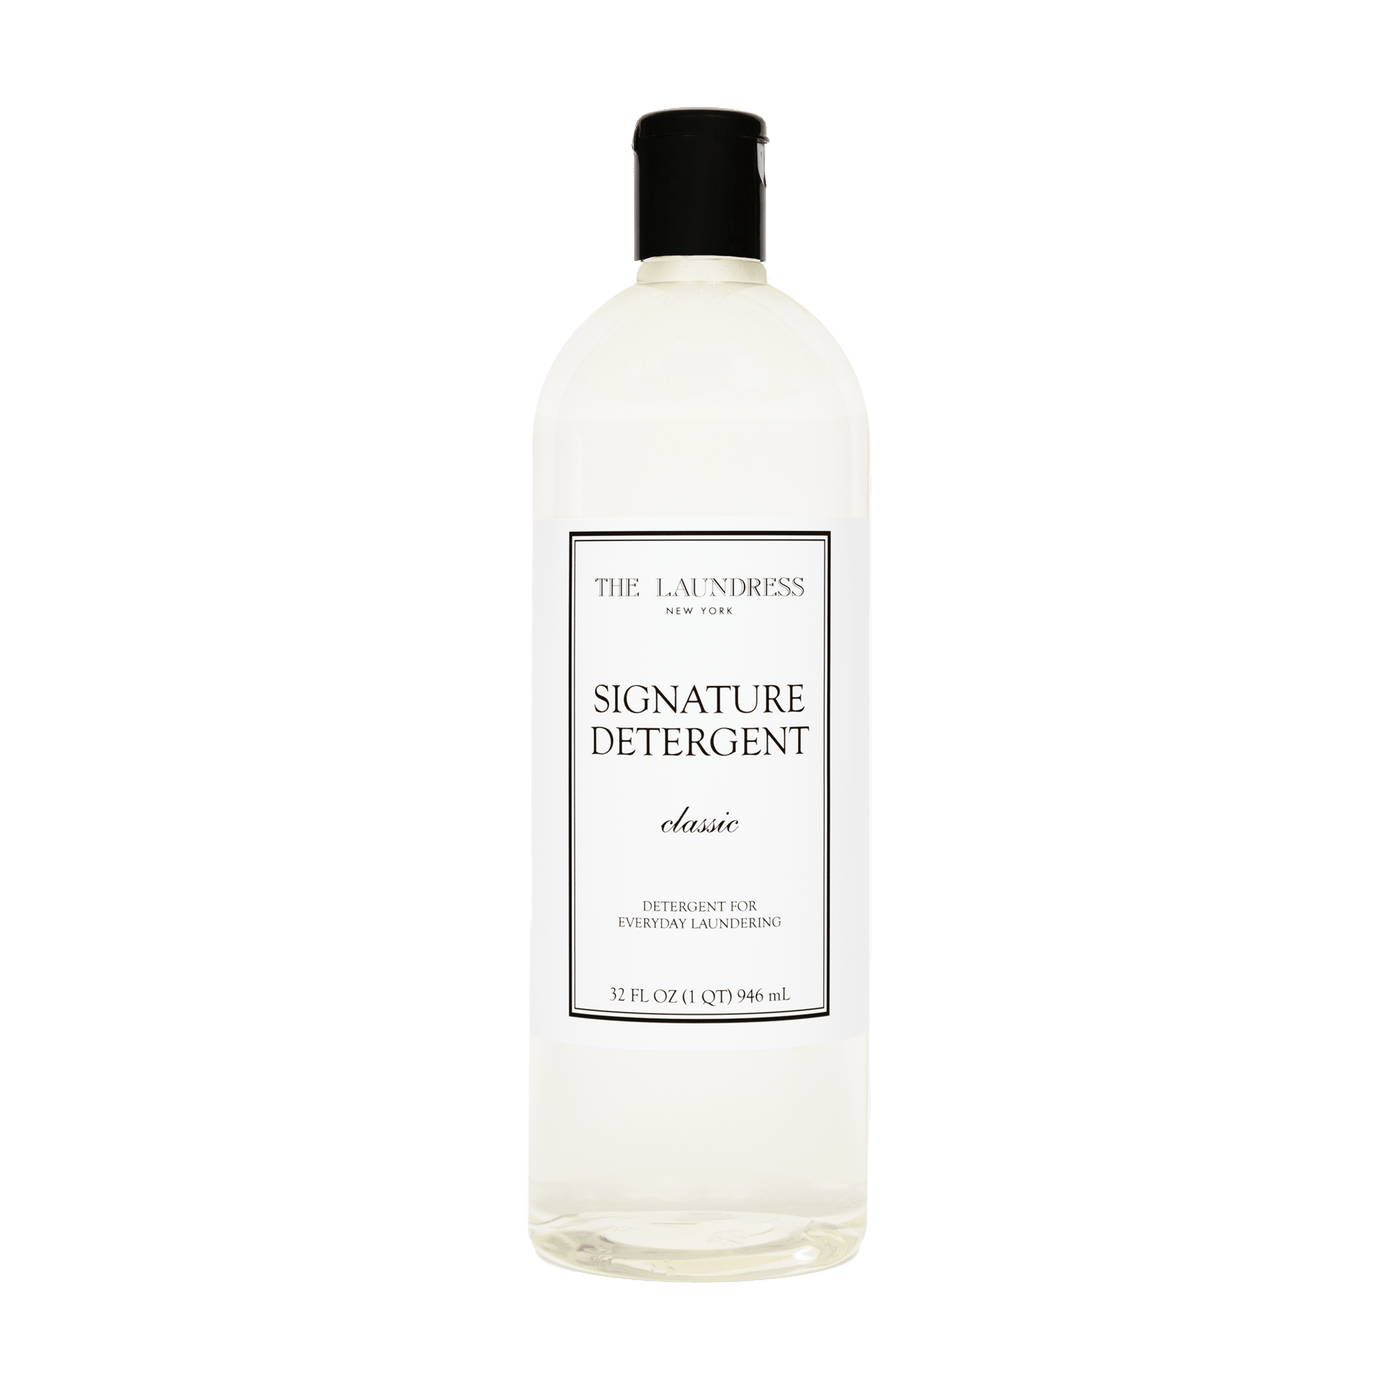 The Laundress Signature Detergent for everyday laundering.